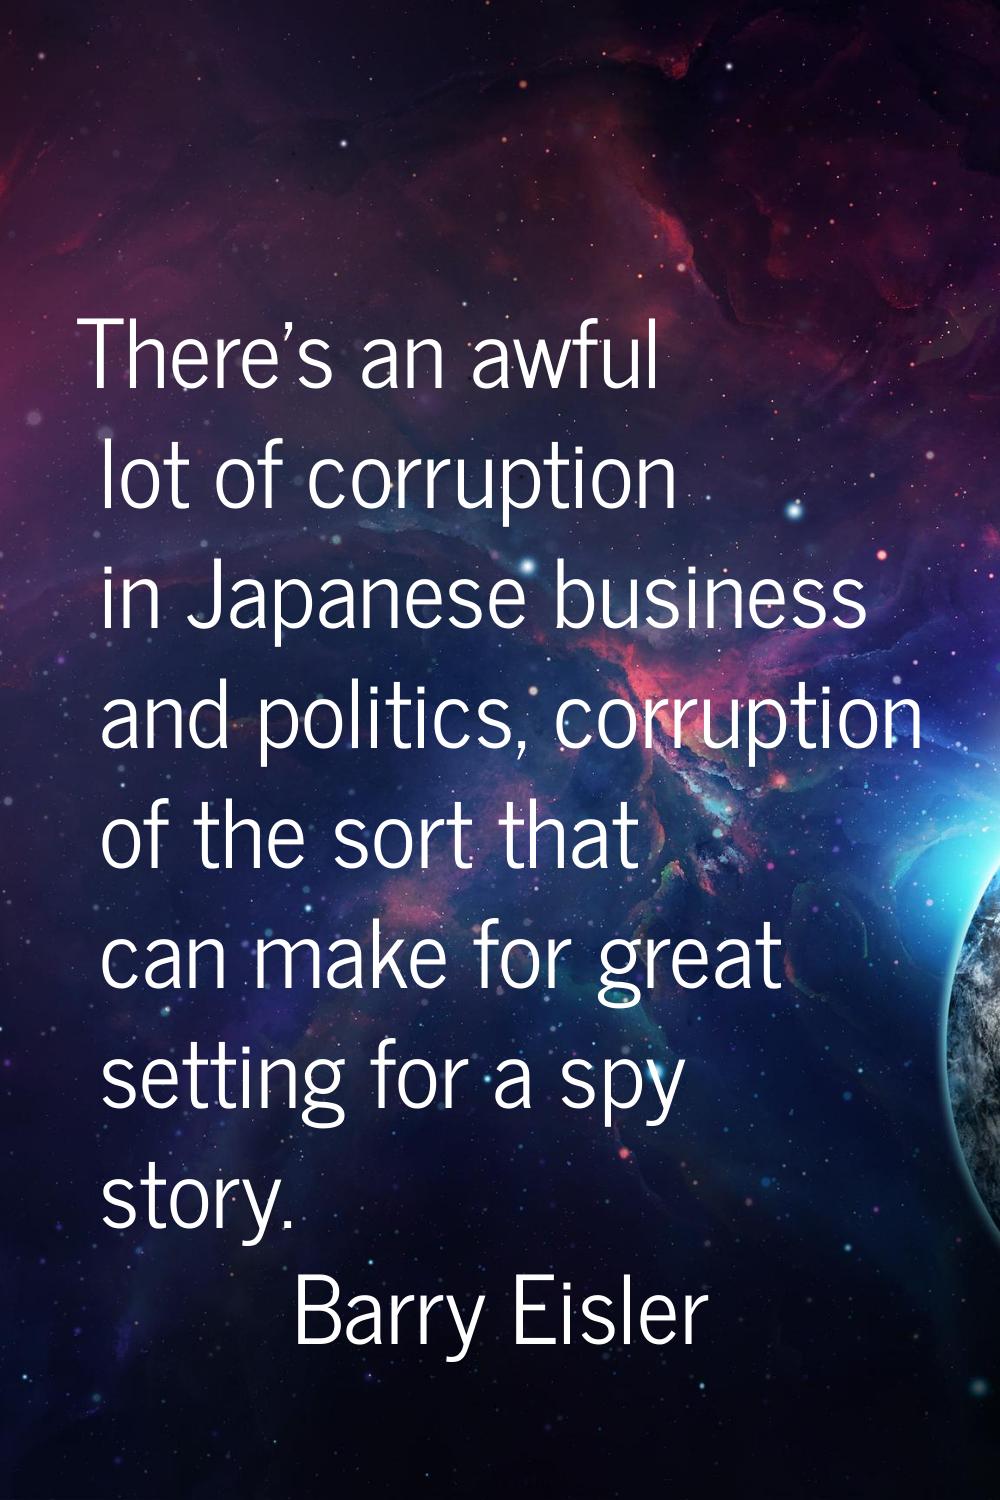 There's an awful lot of corruption in Japanese business and politics, corruption of the sort that c